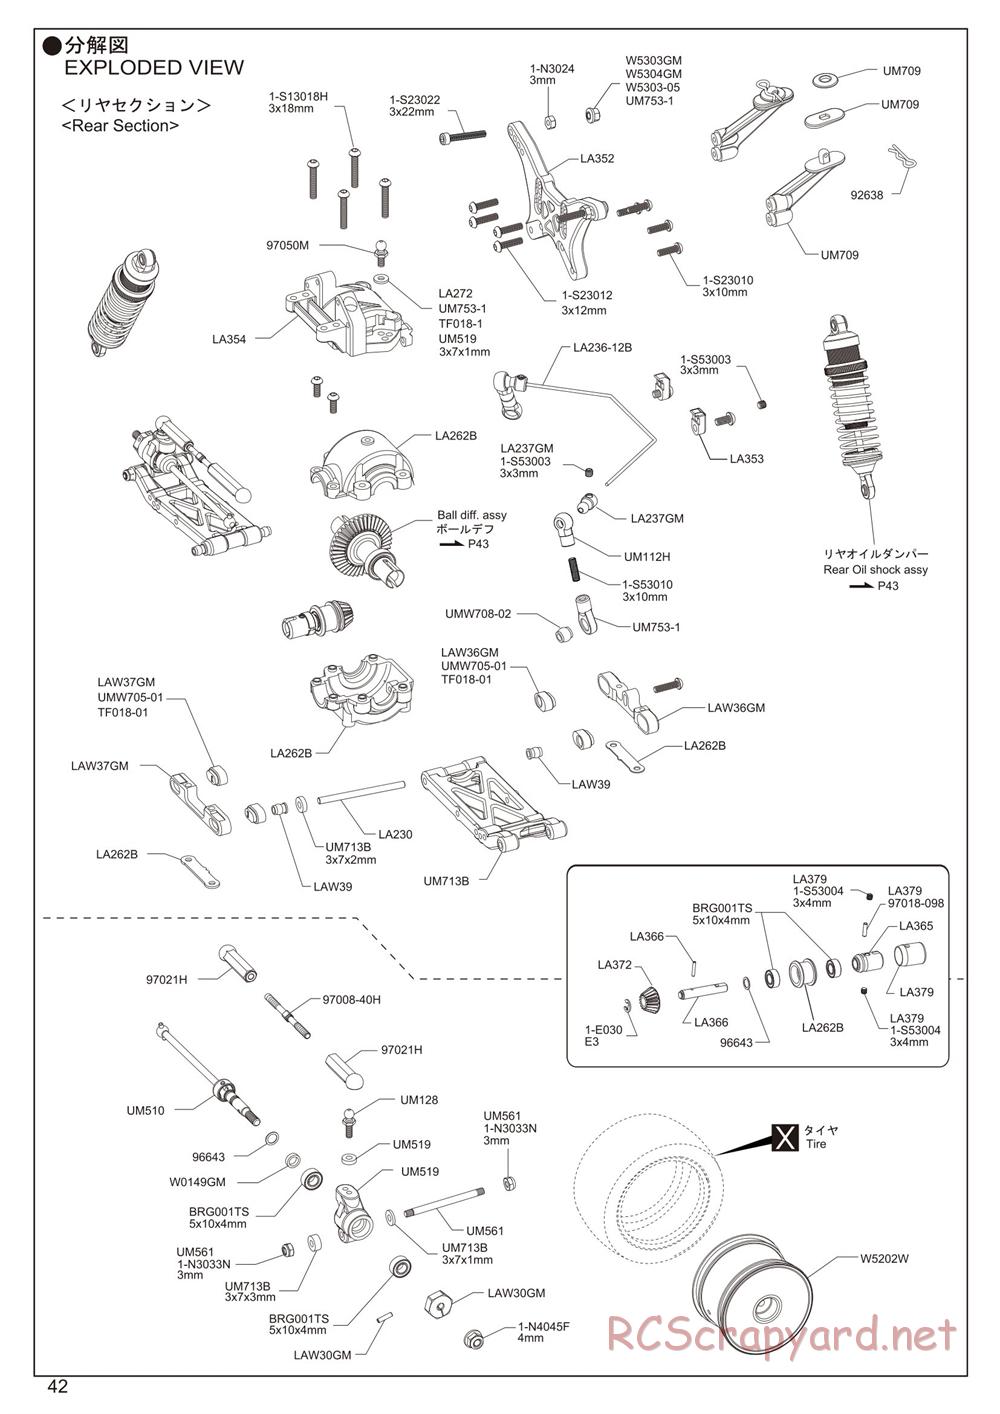 Kyosho - Lazer ZX6.6 - Exploded Views - Page 3